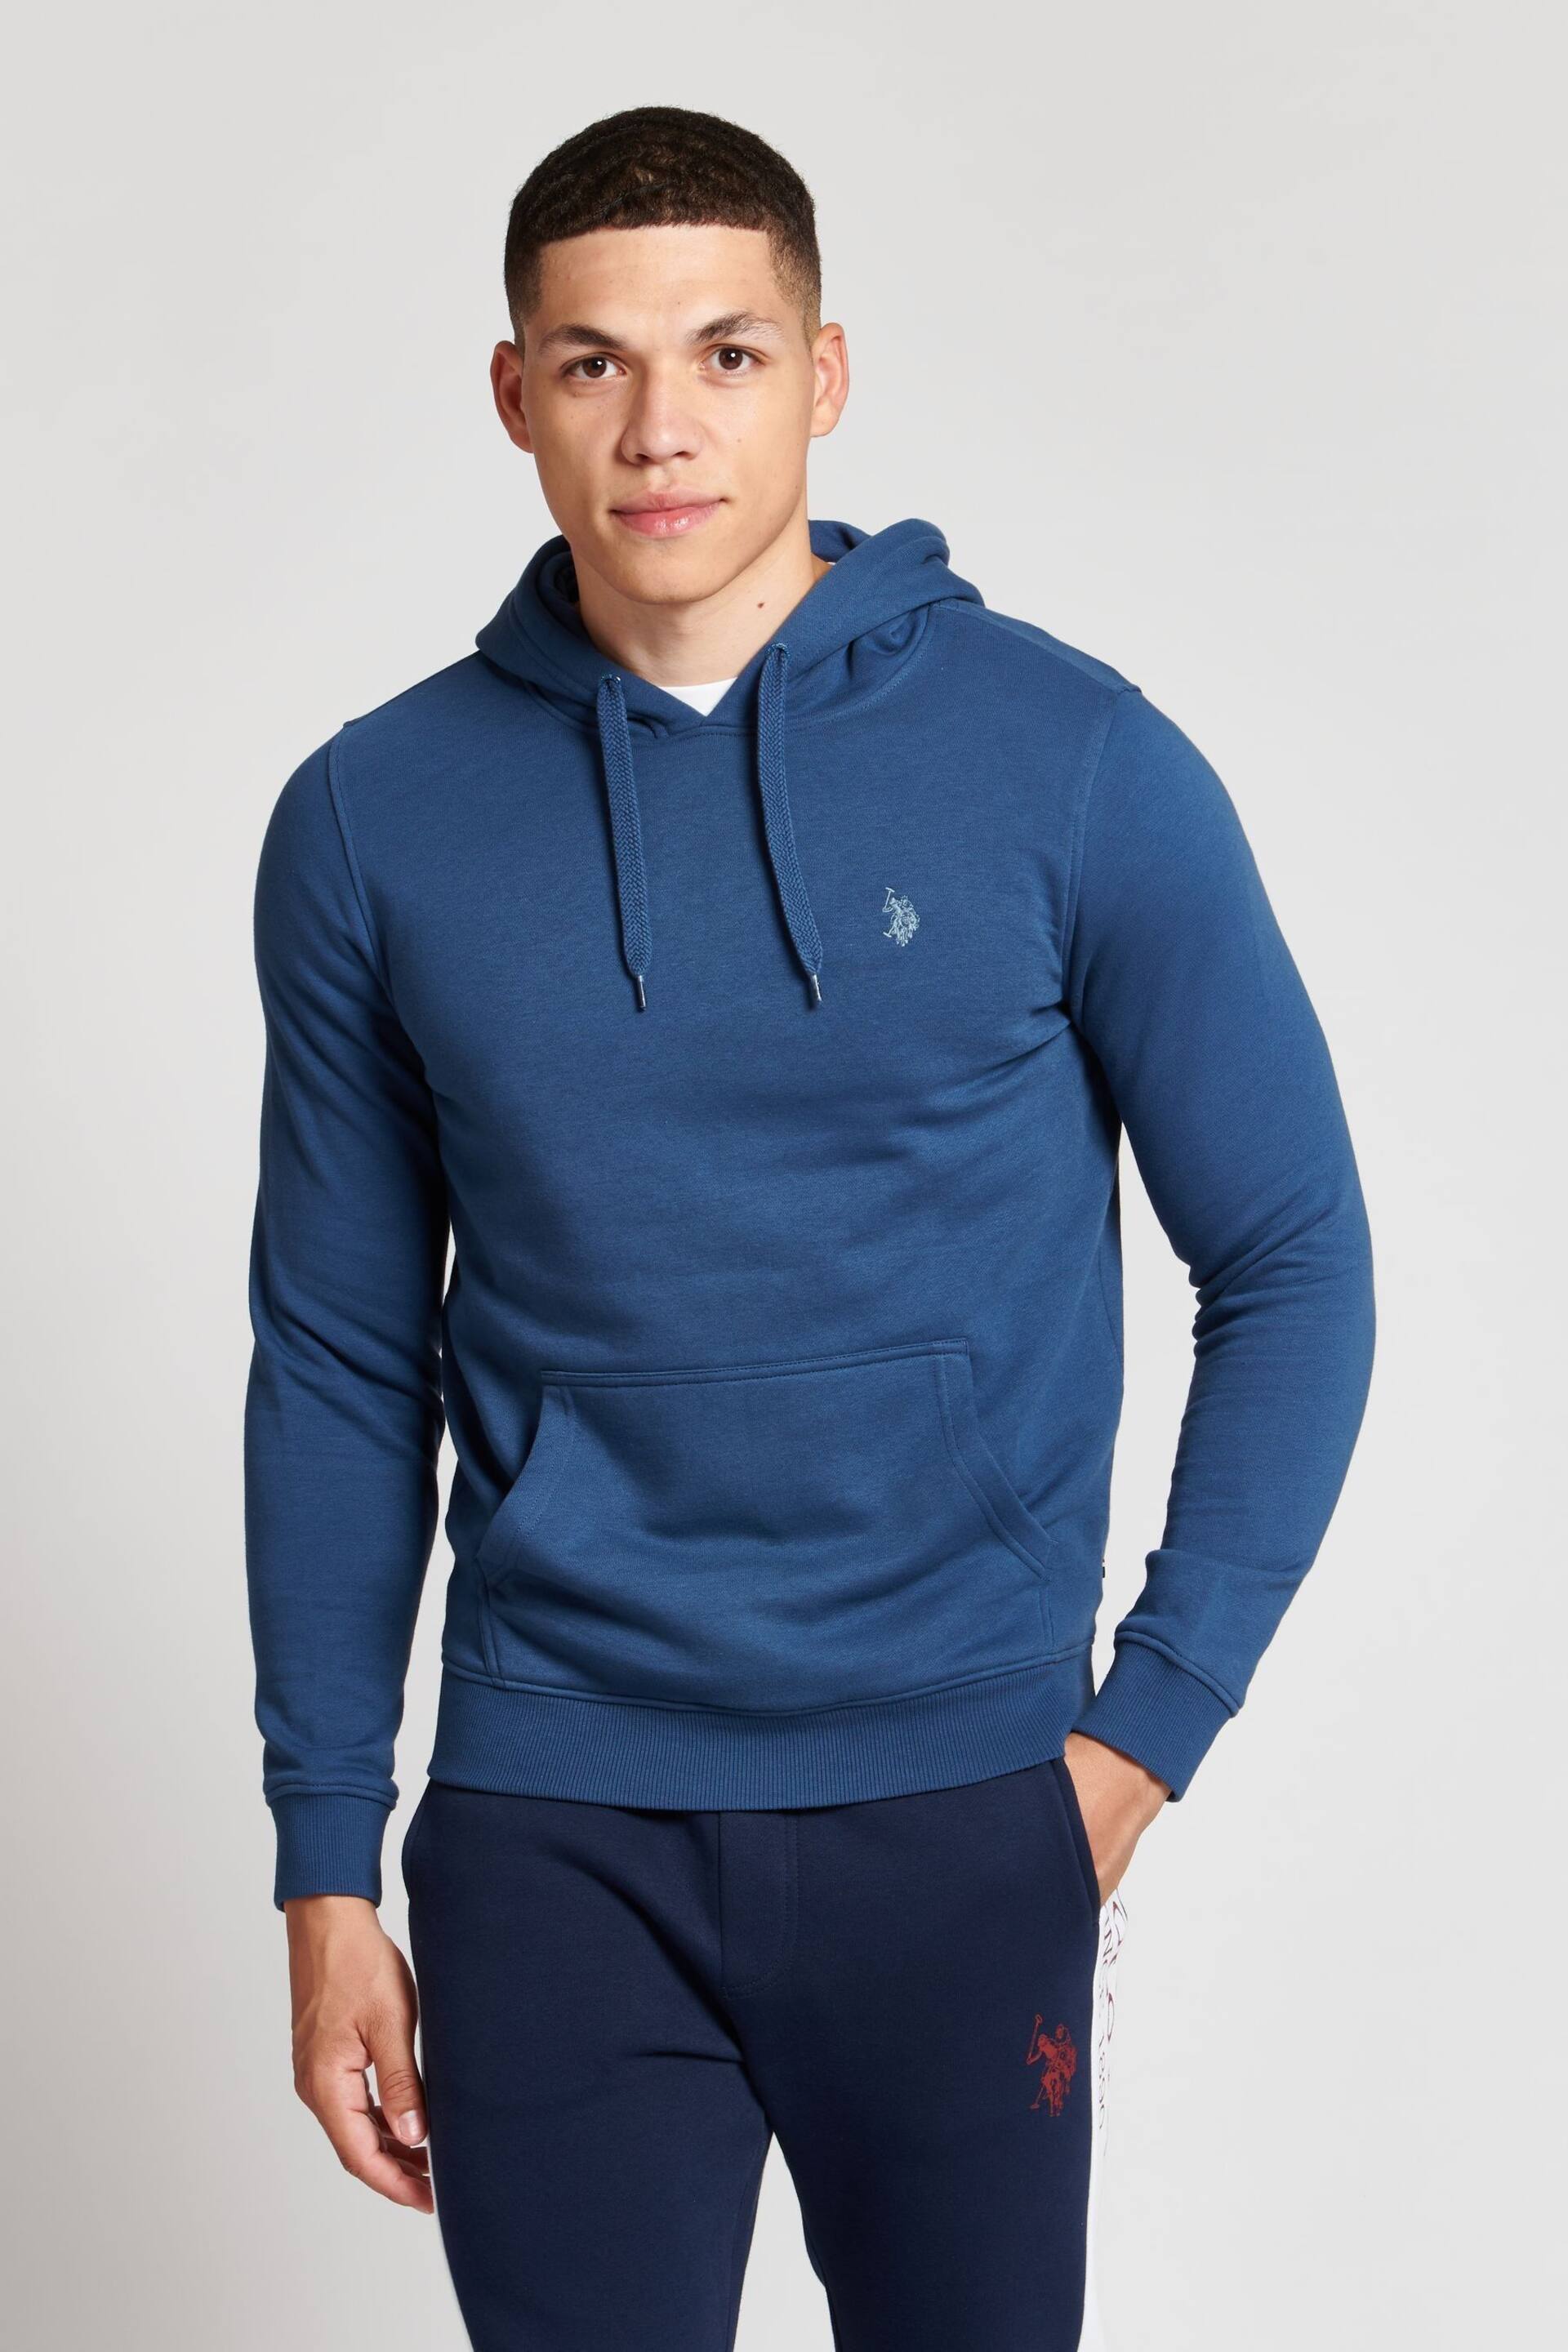 U.S. Polo Assn. Mens BlueSolid DHM Overhead Hoodie - Image 1 of 3